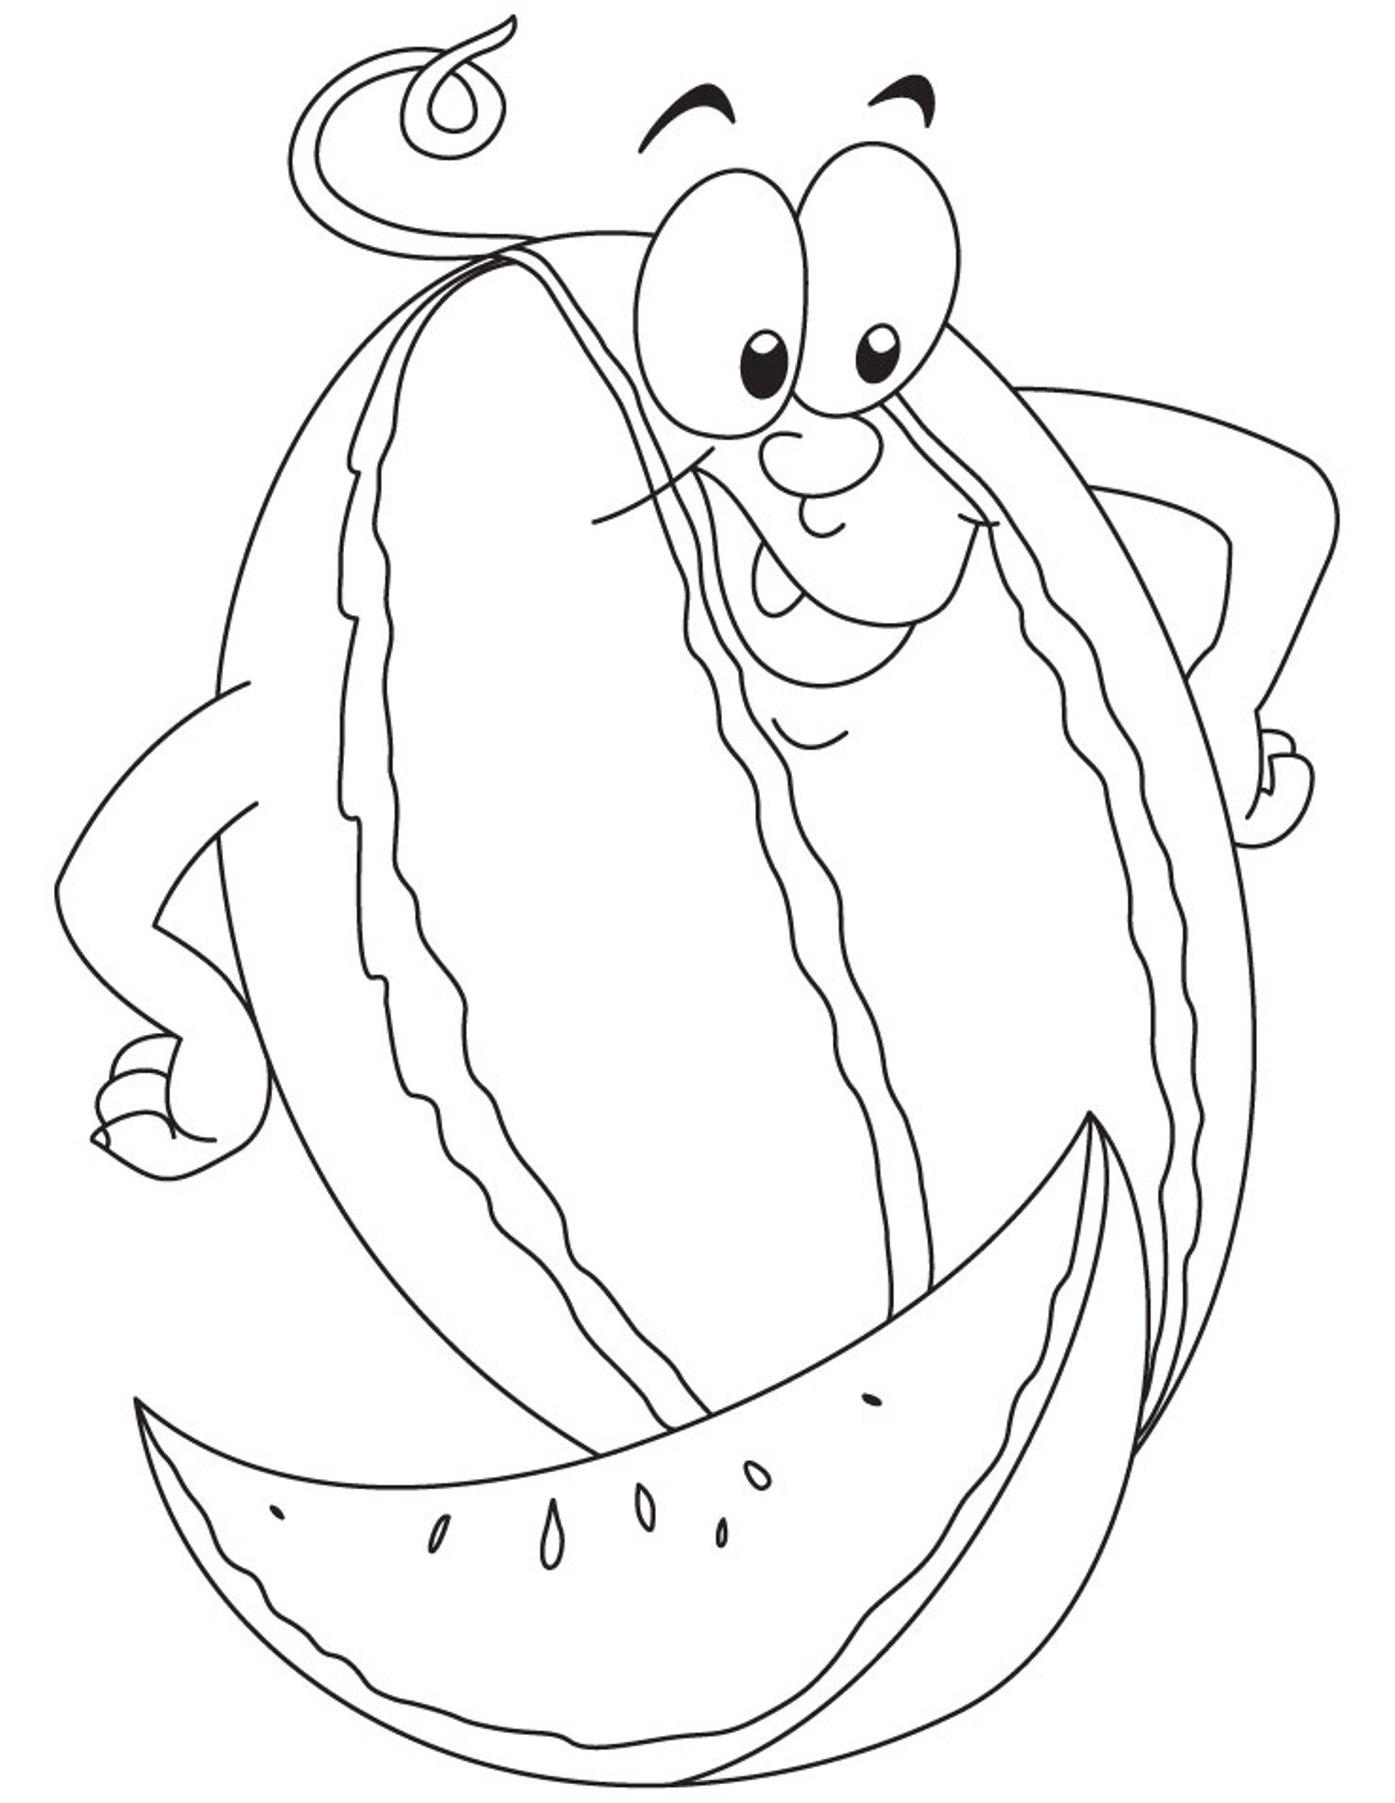 Easy Watermelon Fruit S6884 Coloring Page